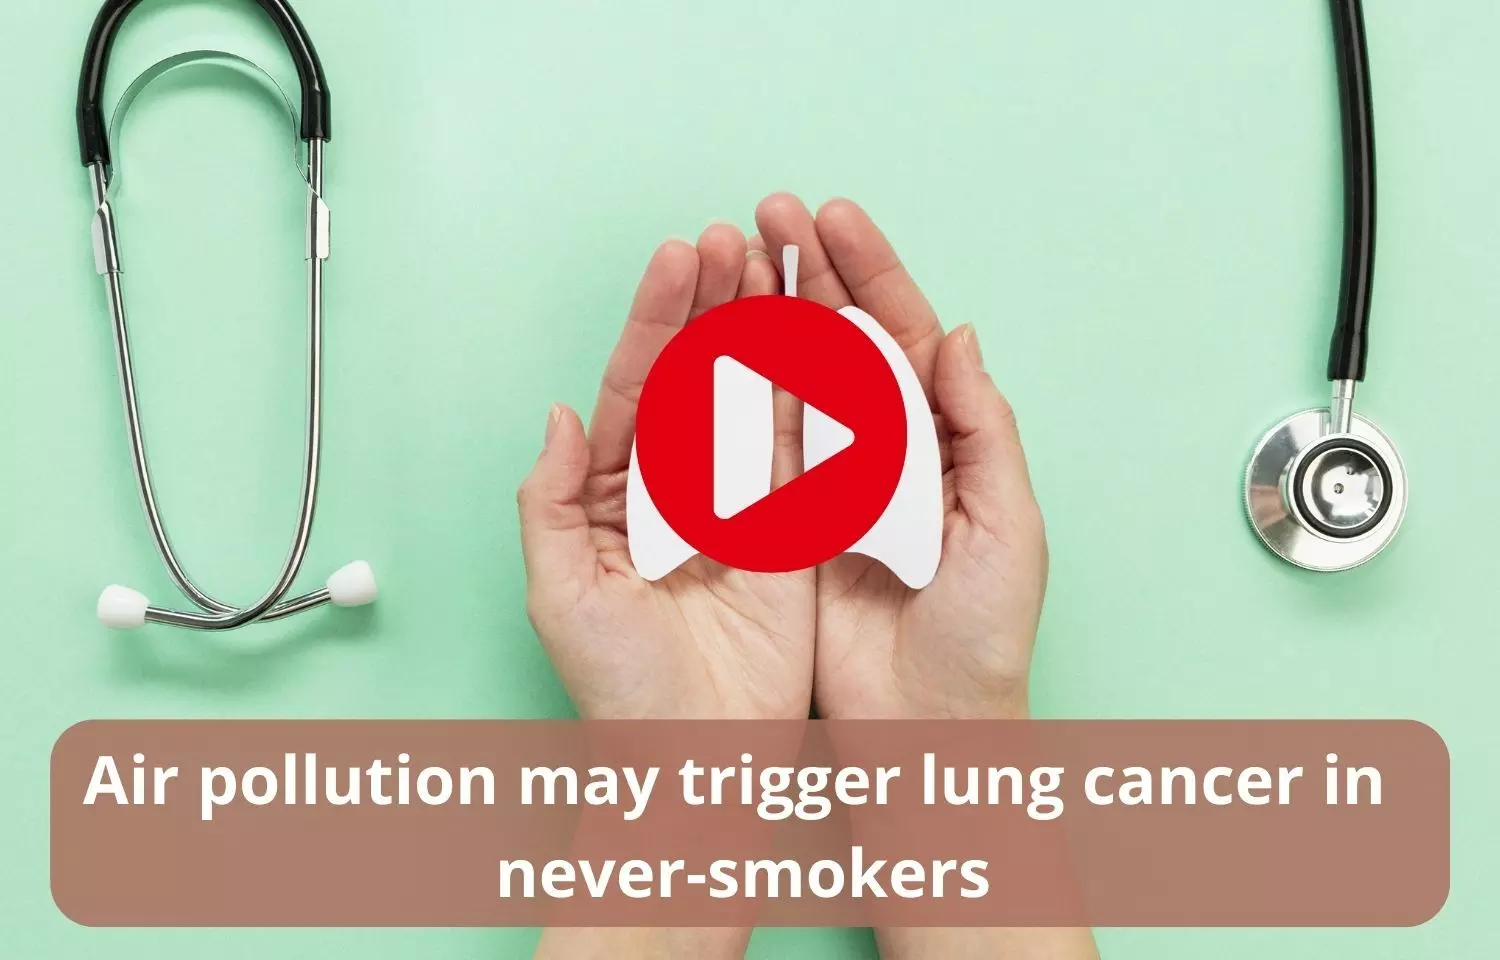 Air pollution may trigger lung cancer in never-smokers